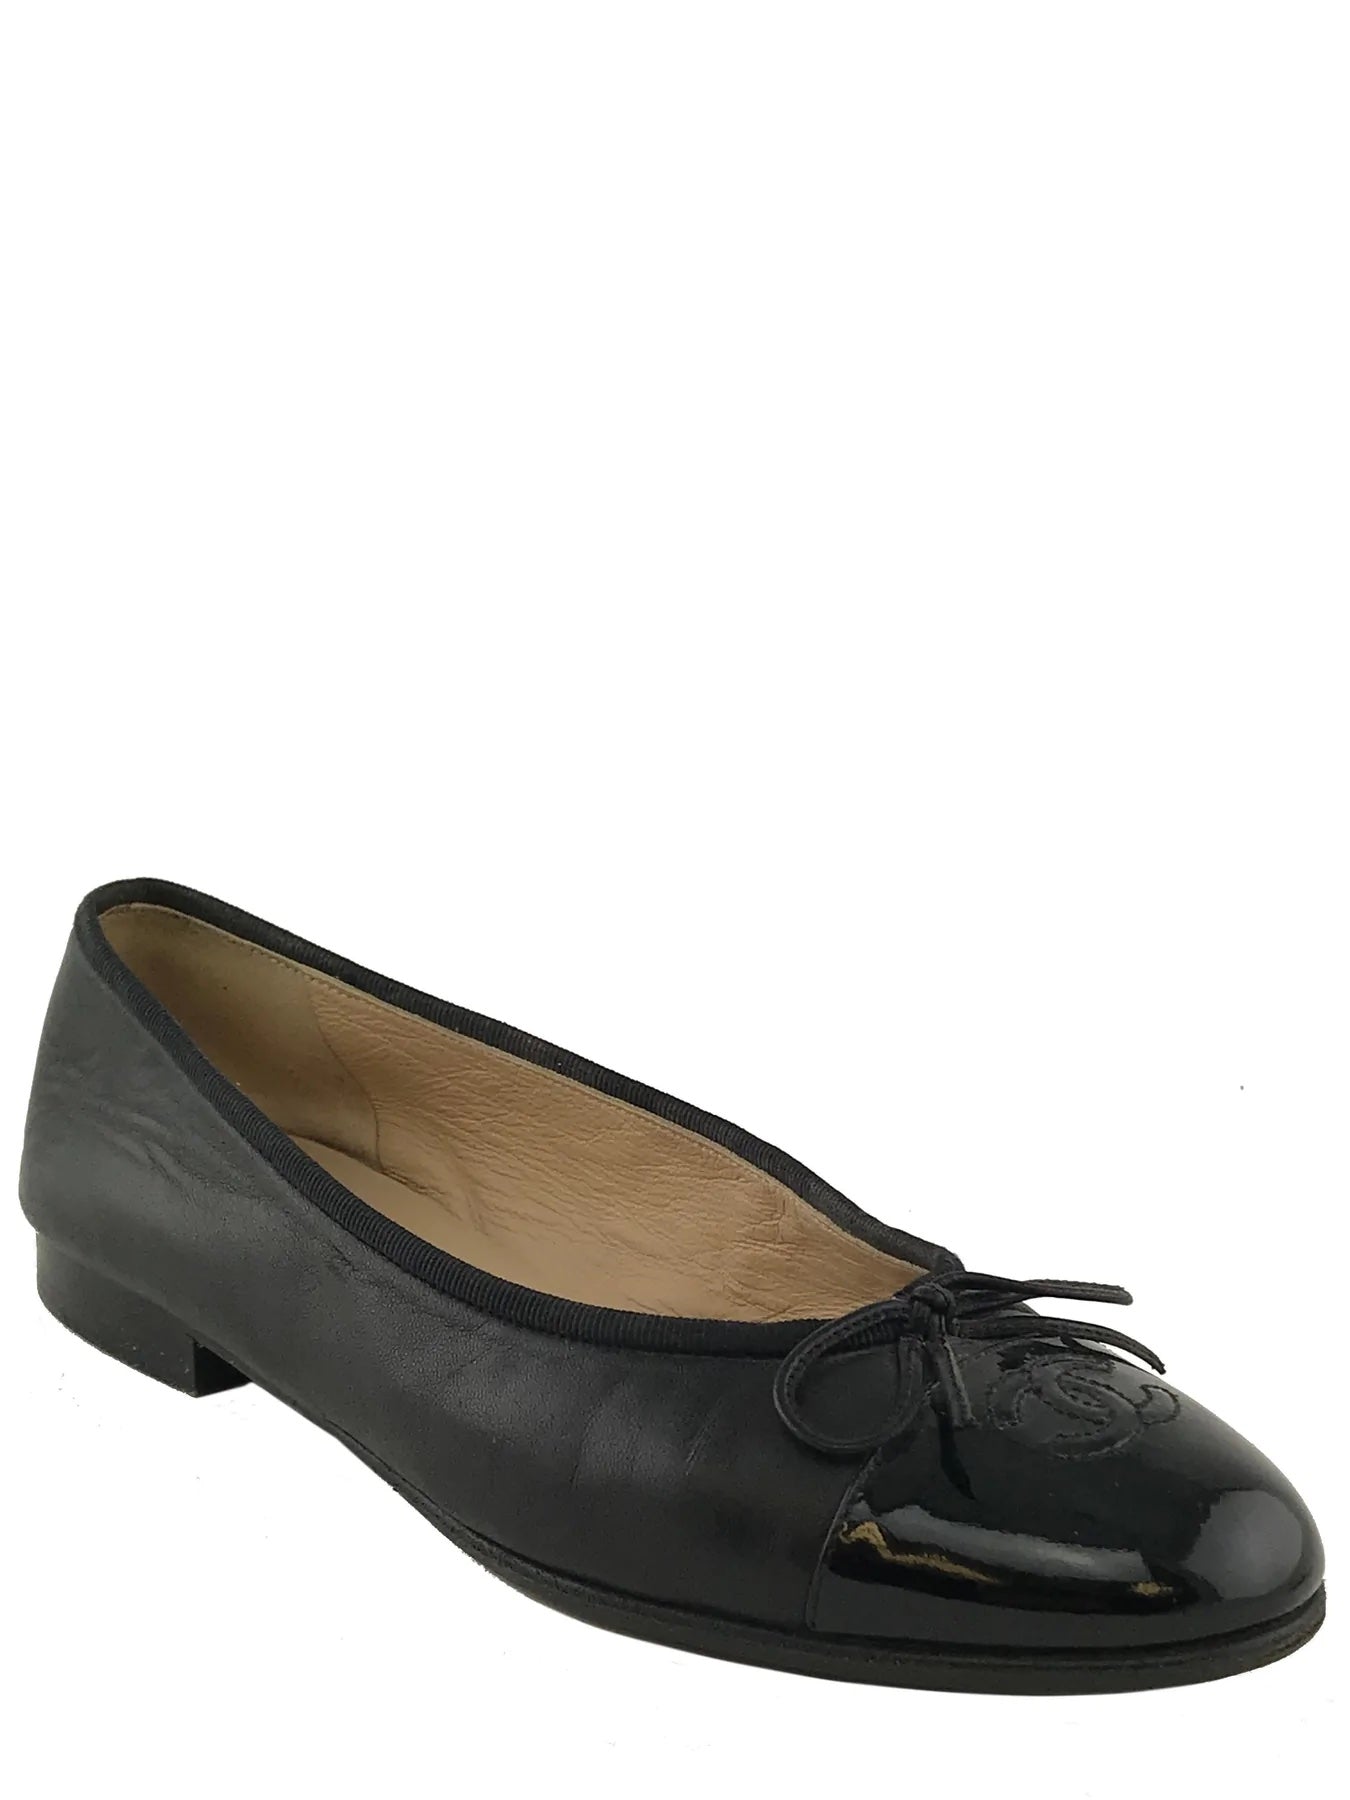 Chanel Tan and Black Cap-Toe Camellia Ballet Flats For Sale at